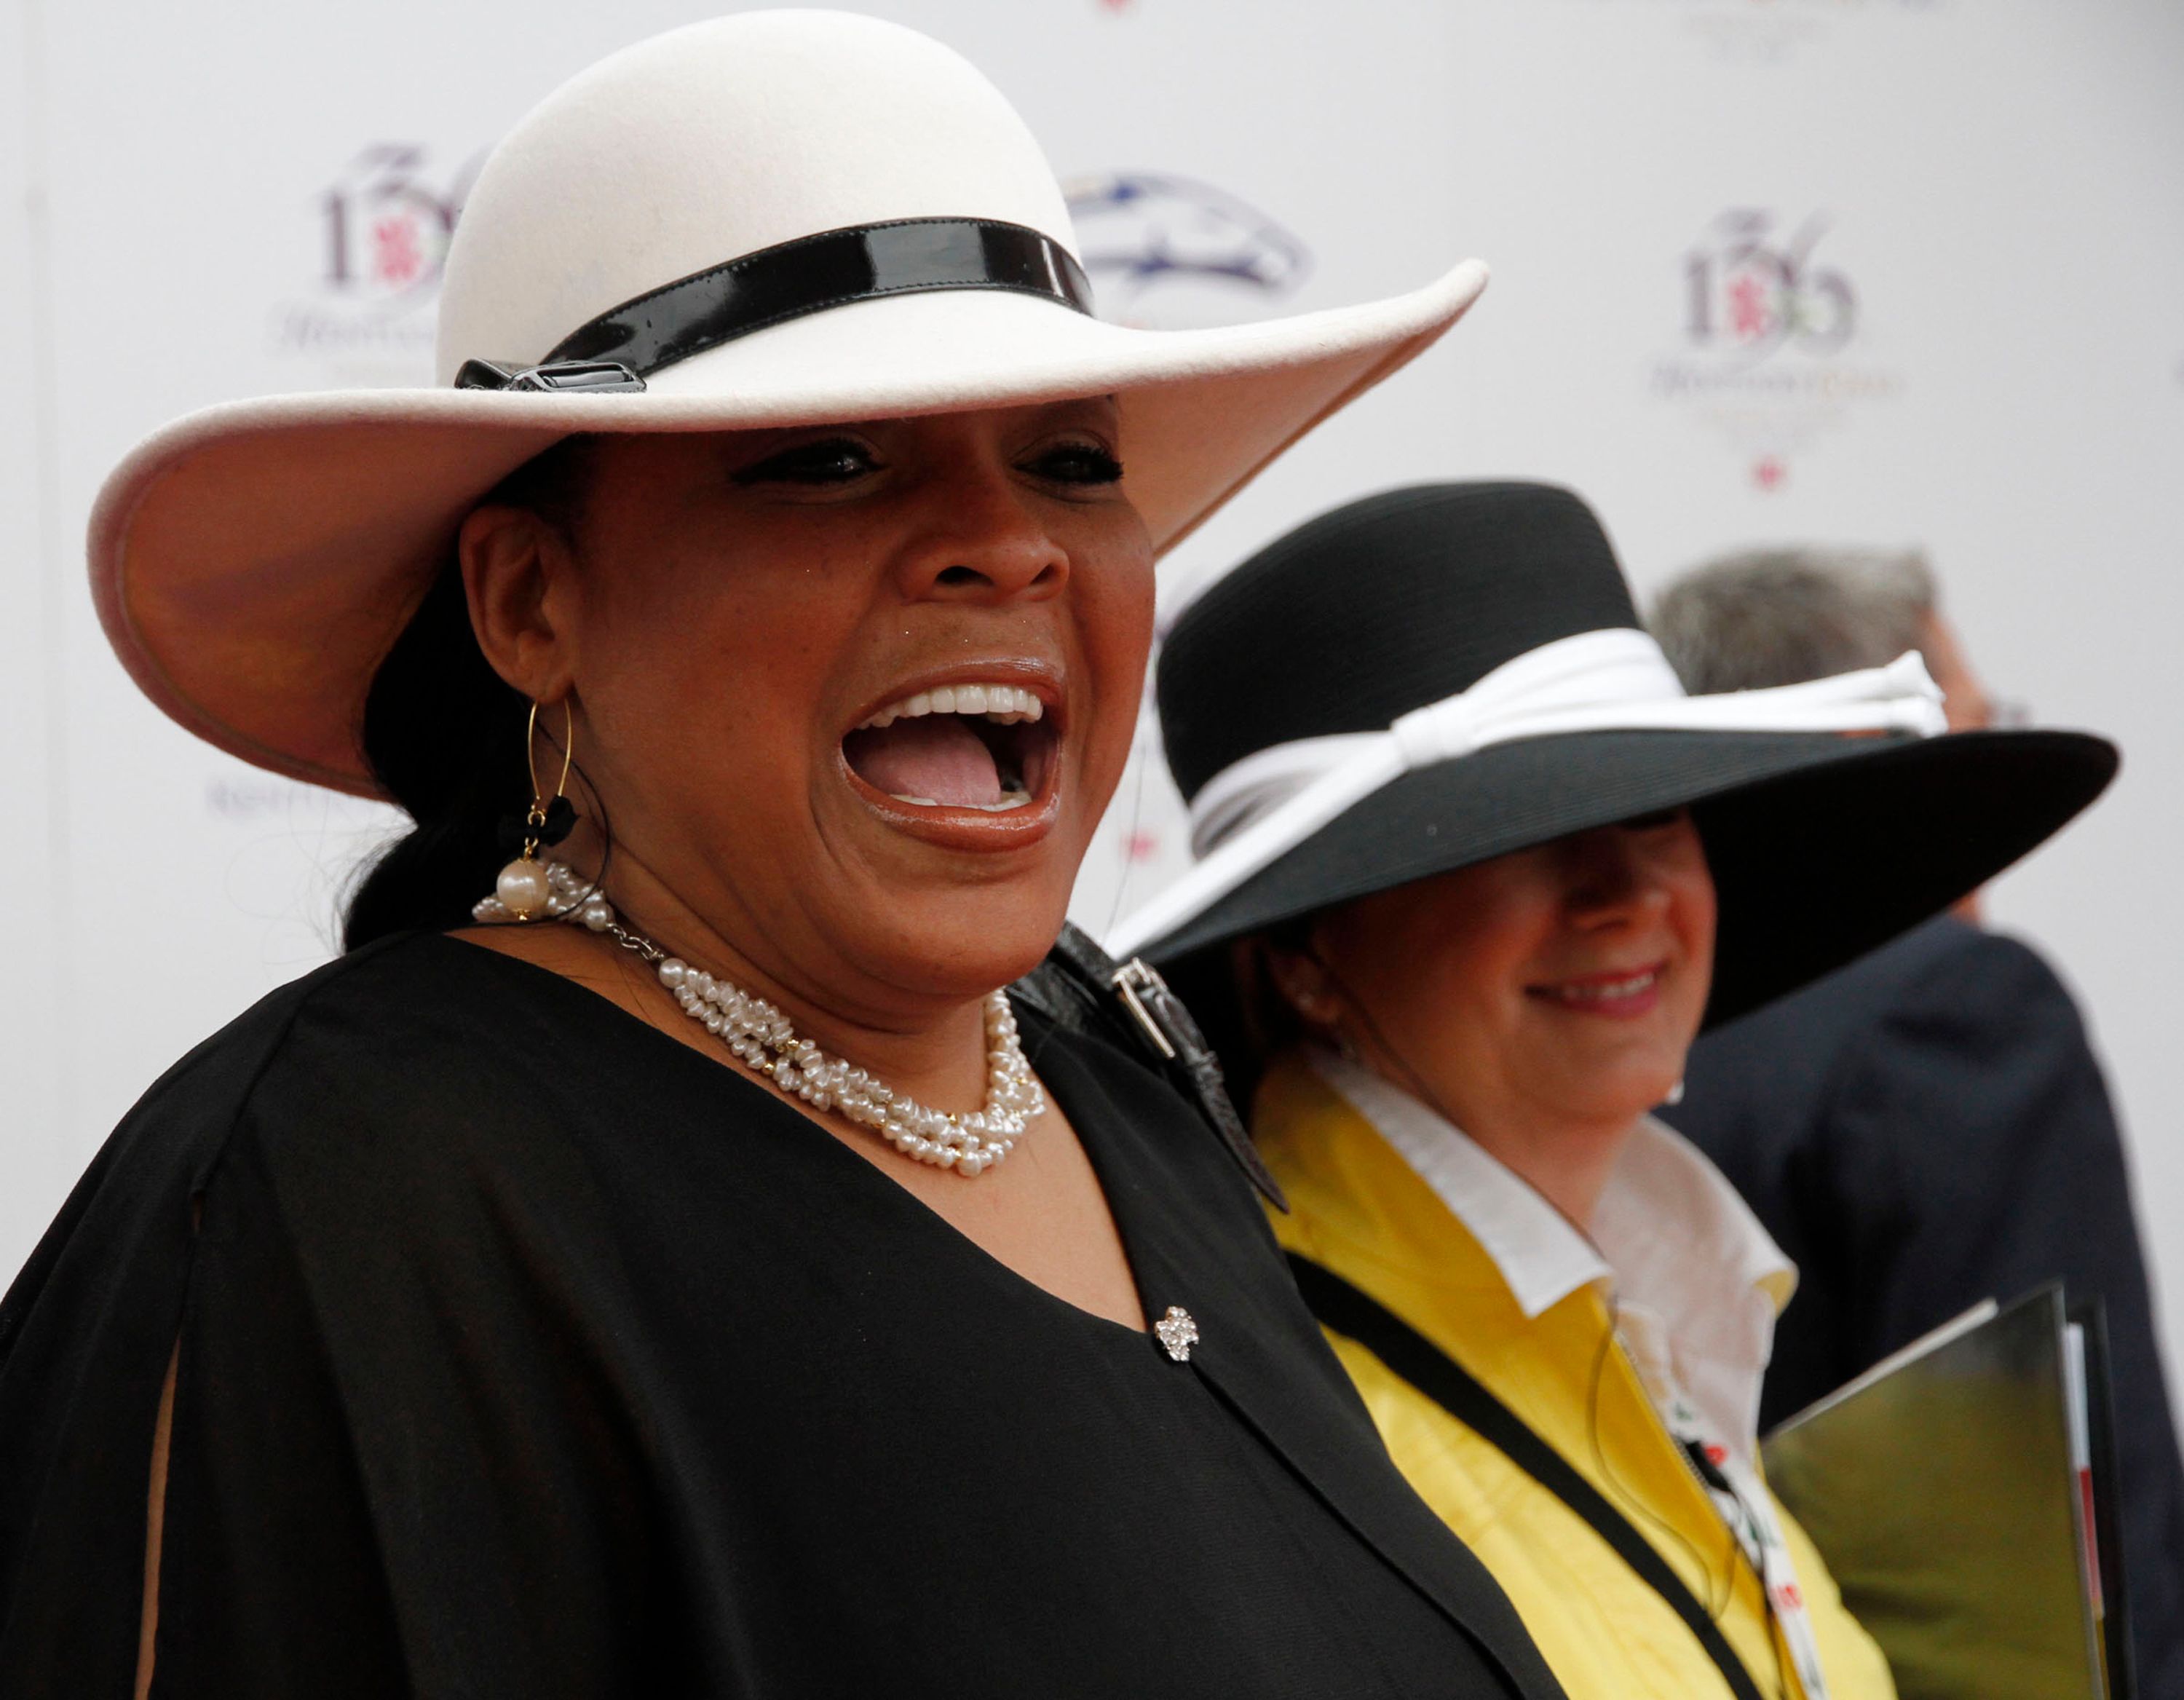 Sheila Raye Charles at the 136th running of the Kentucky Derby at Churchill Downs in Louisville, Kentucky on May 1, 2010 | Photo: David Perry/Lexington Herald-Leader/Tribune News Service/Getty Images